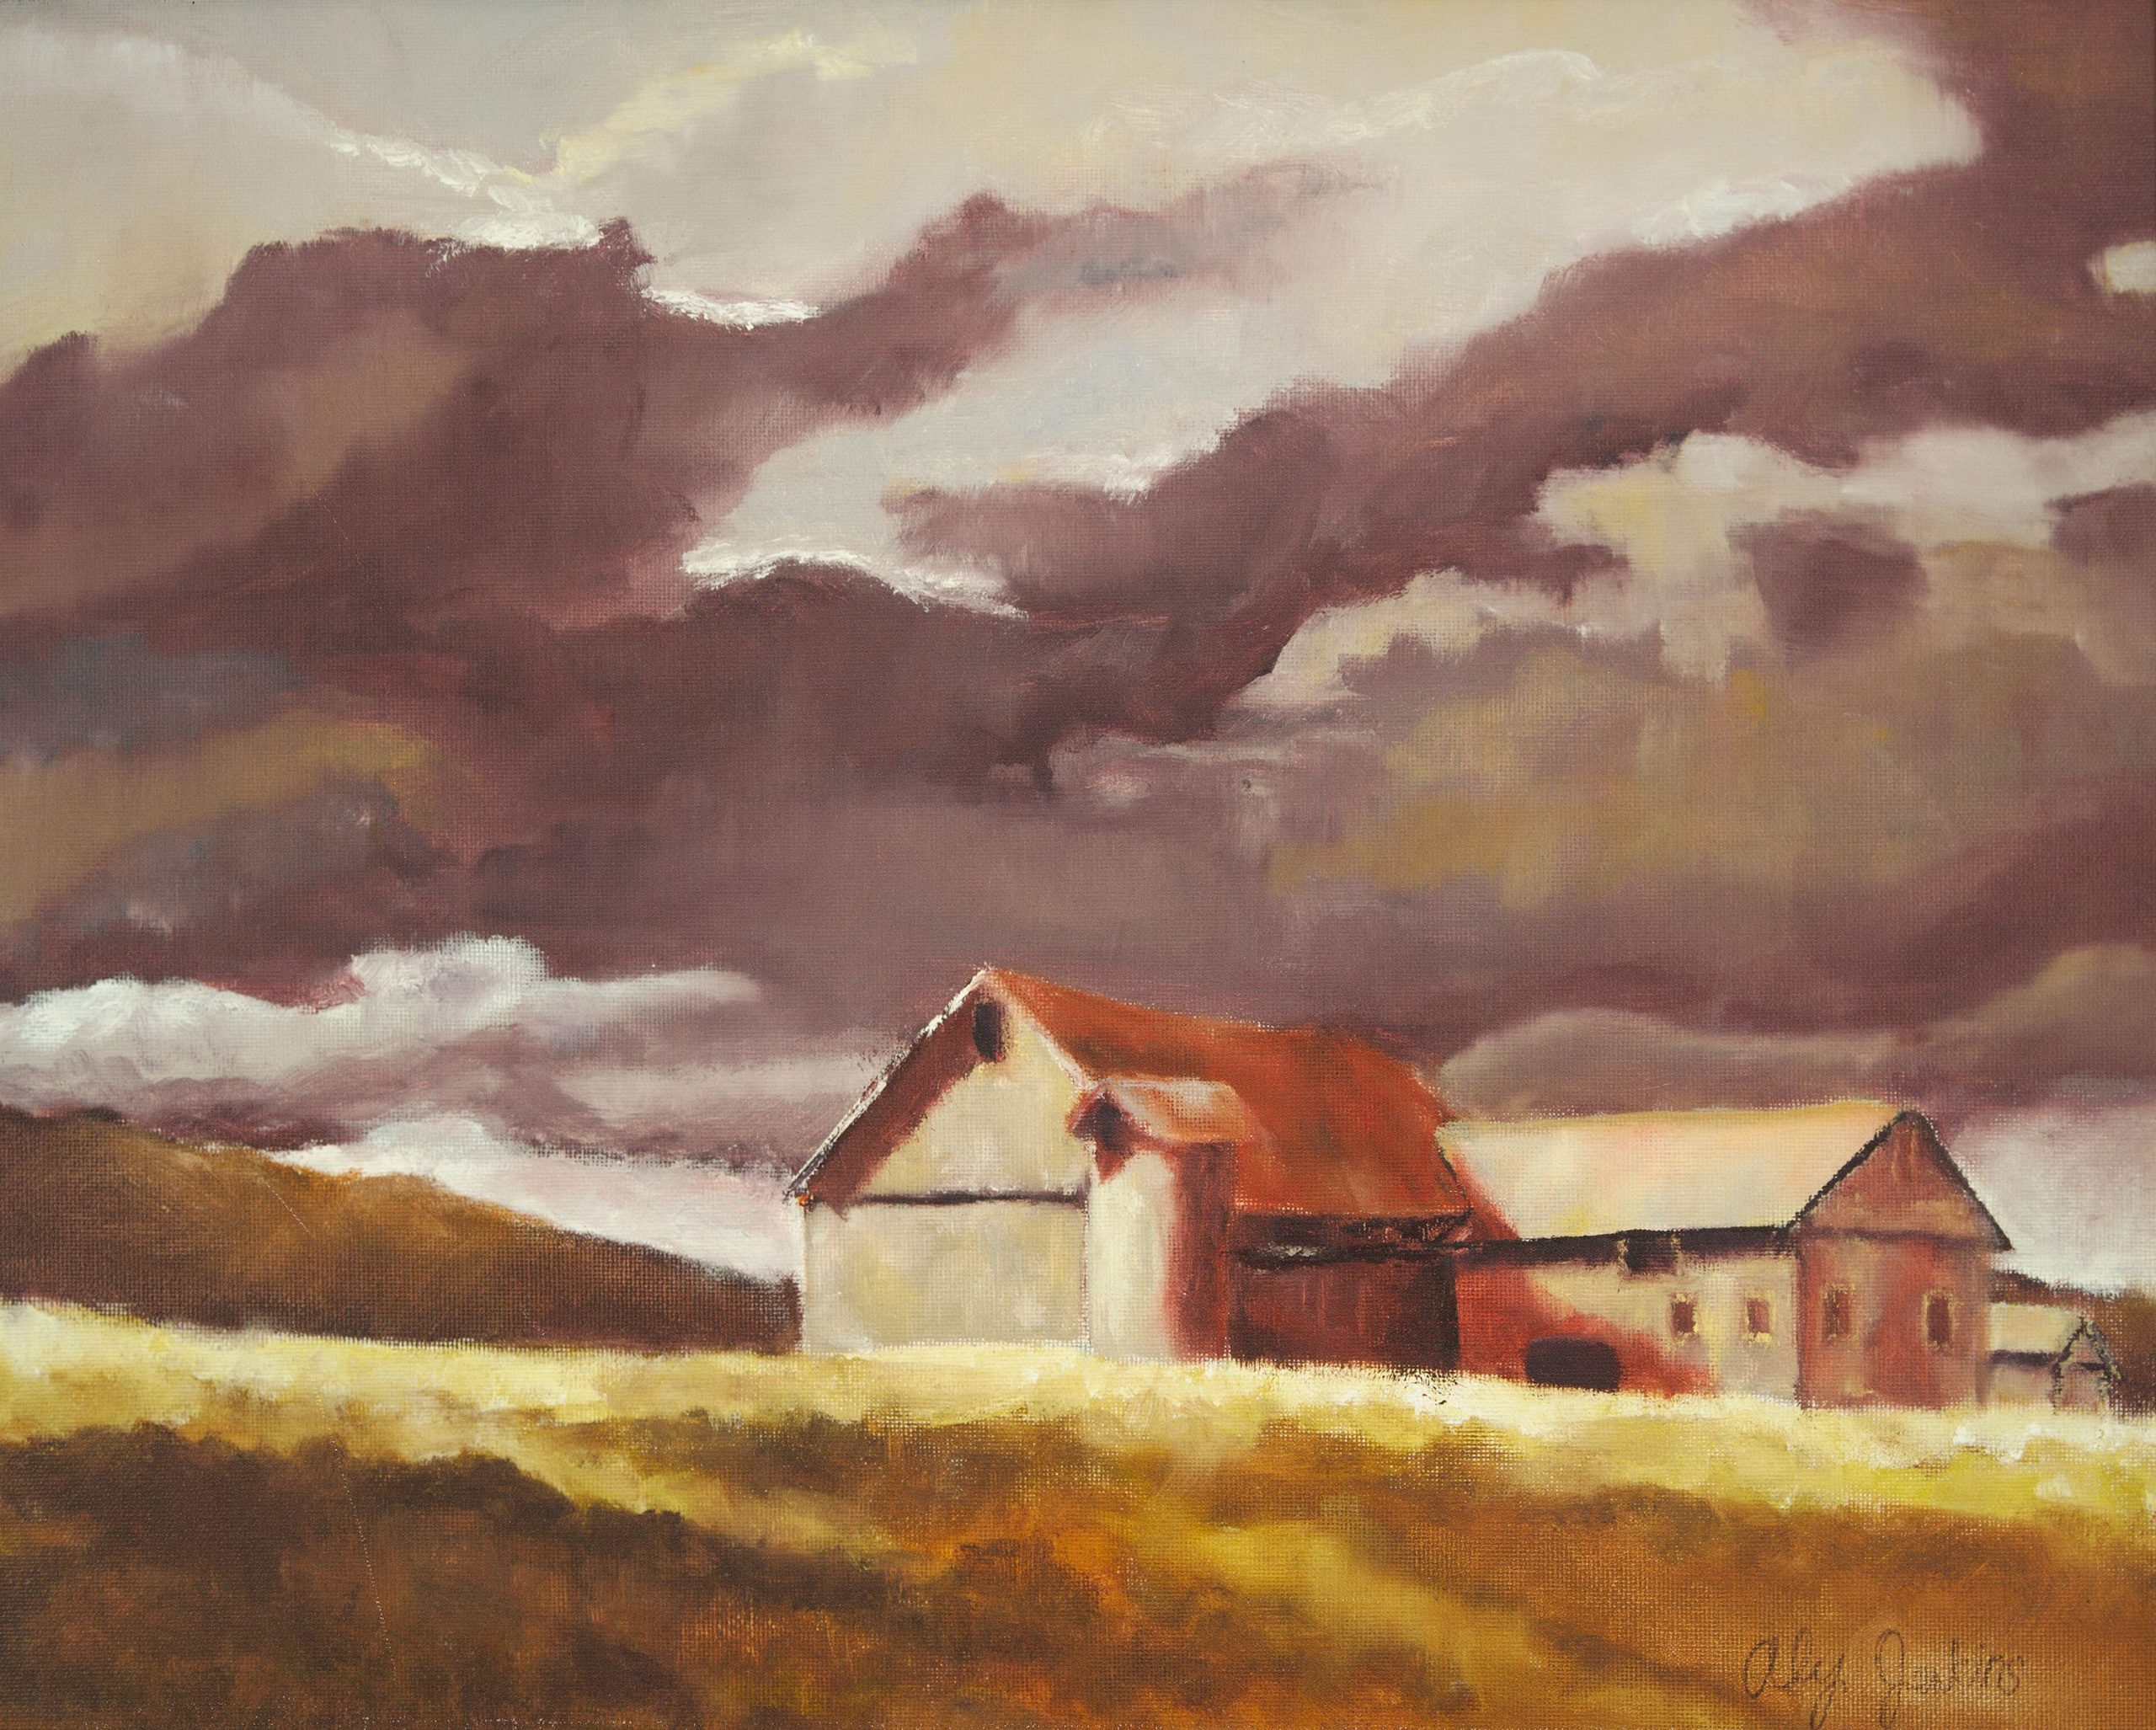 Farm house in the country with a silo and sun shining through dark clouds